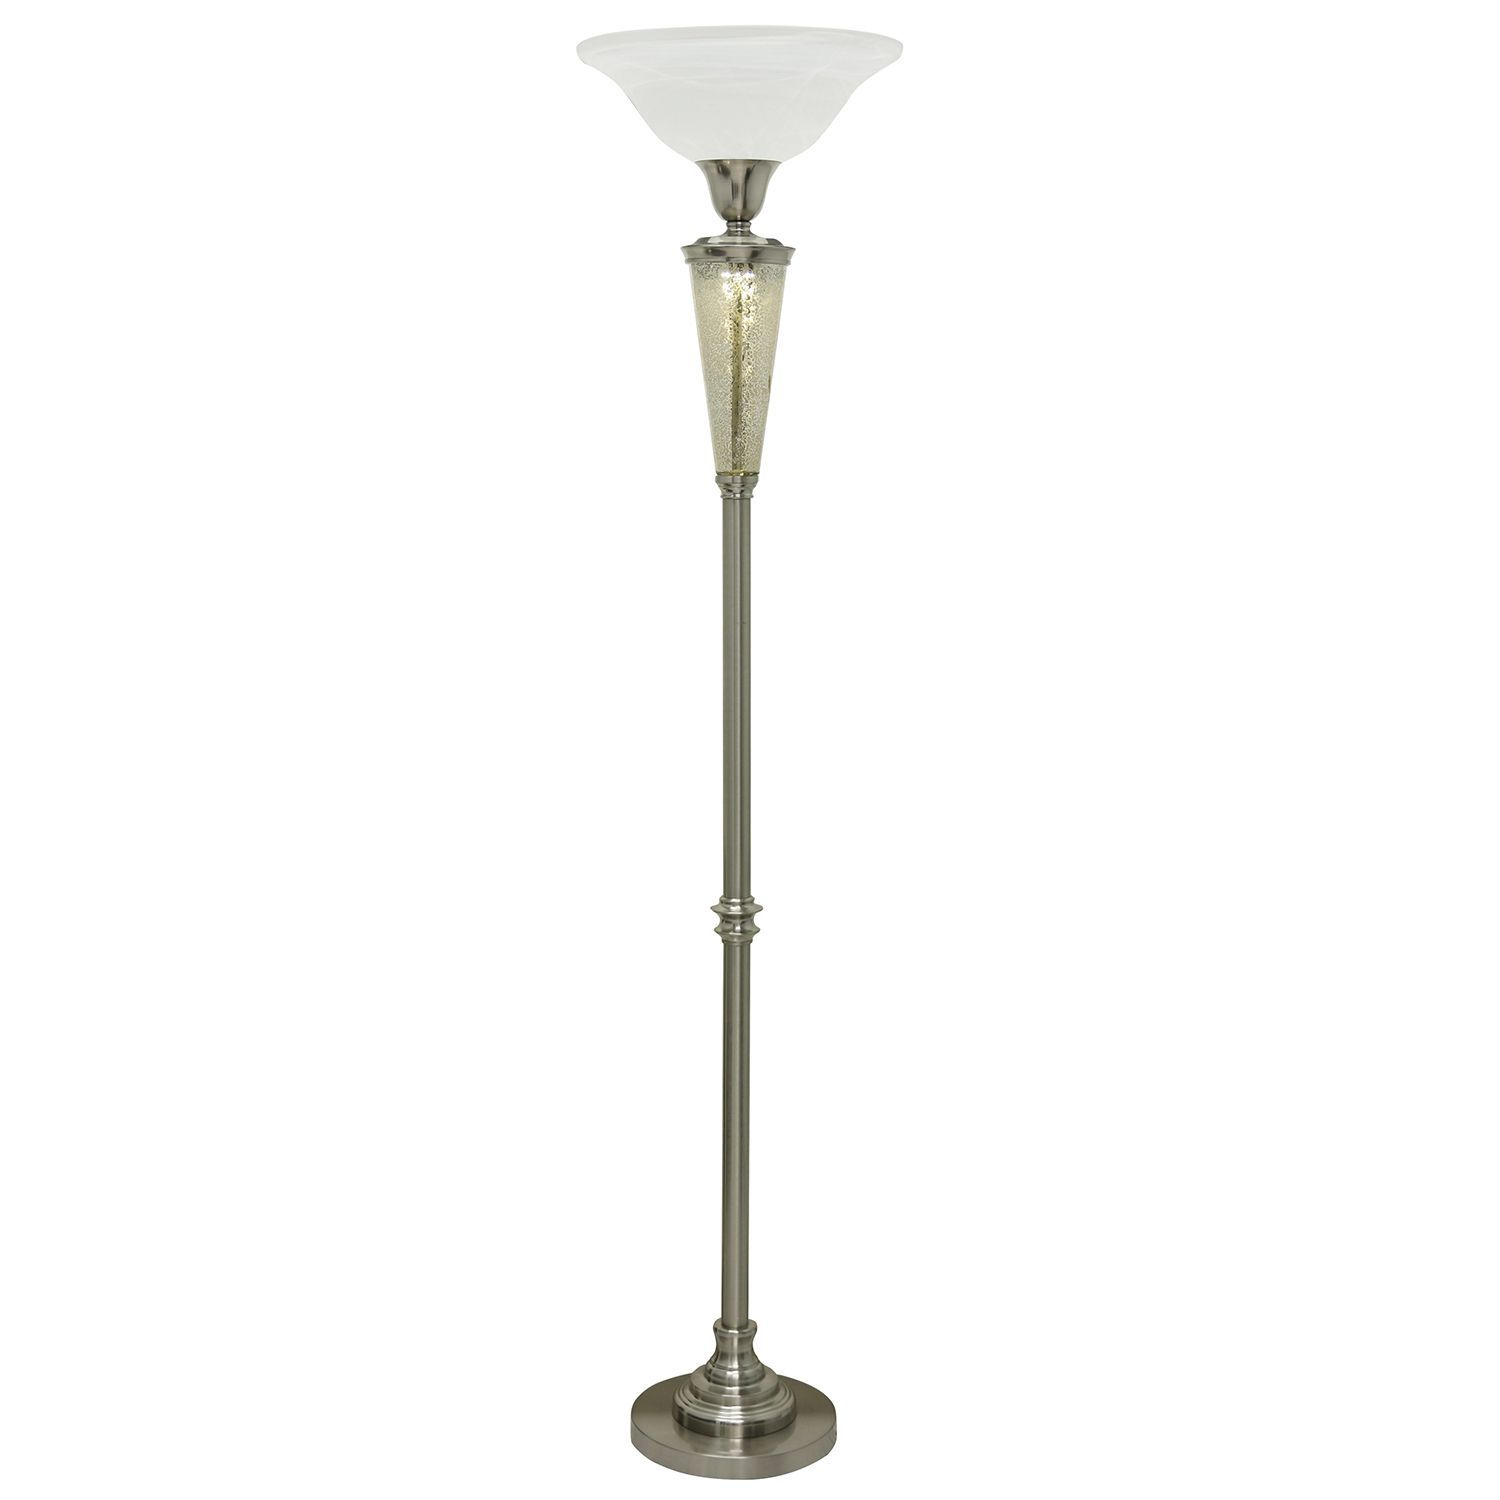 Northbay Finish Torchiere Floor Lamp Torchiere Floor Lamp pertaining to measurements 1500 X 1500